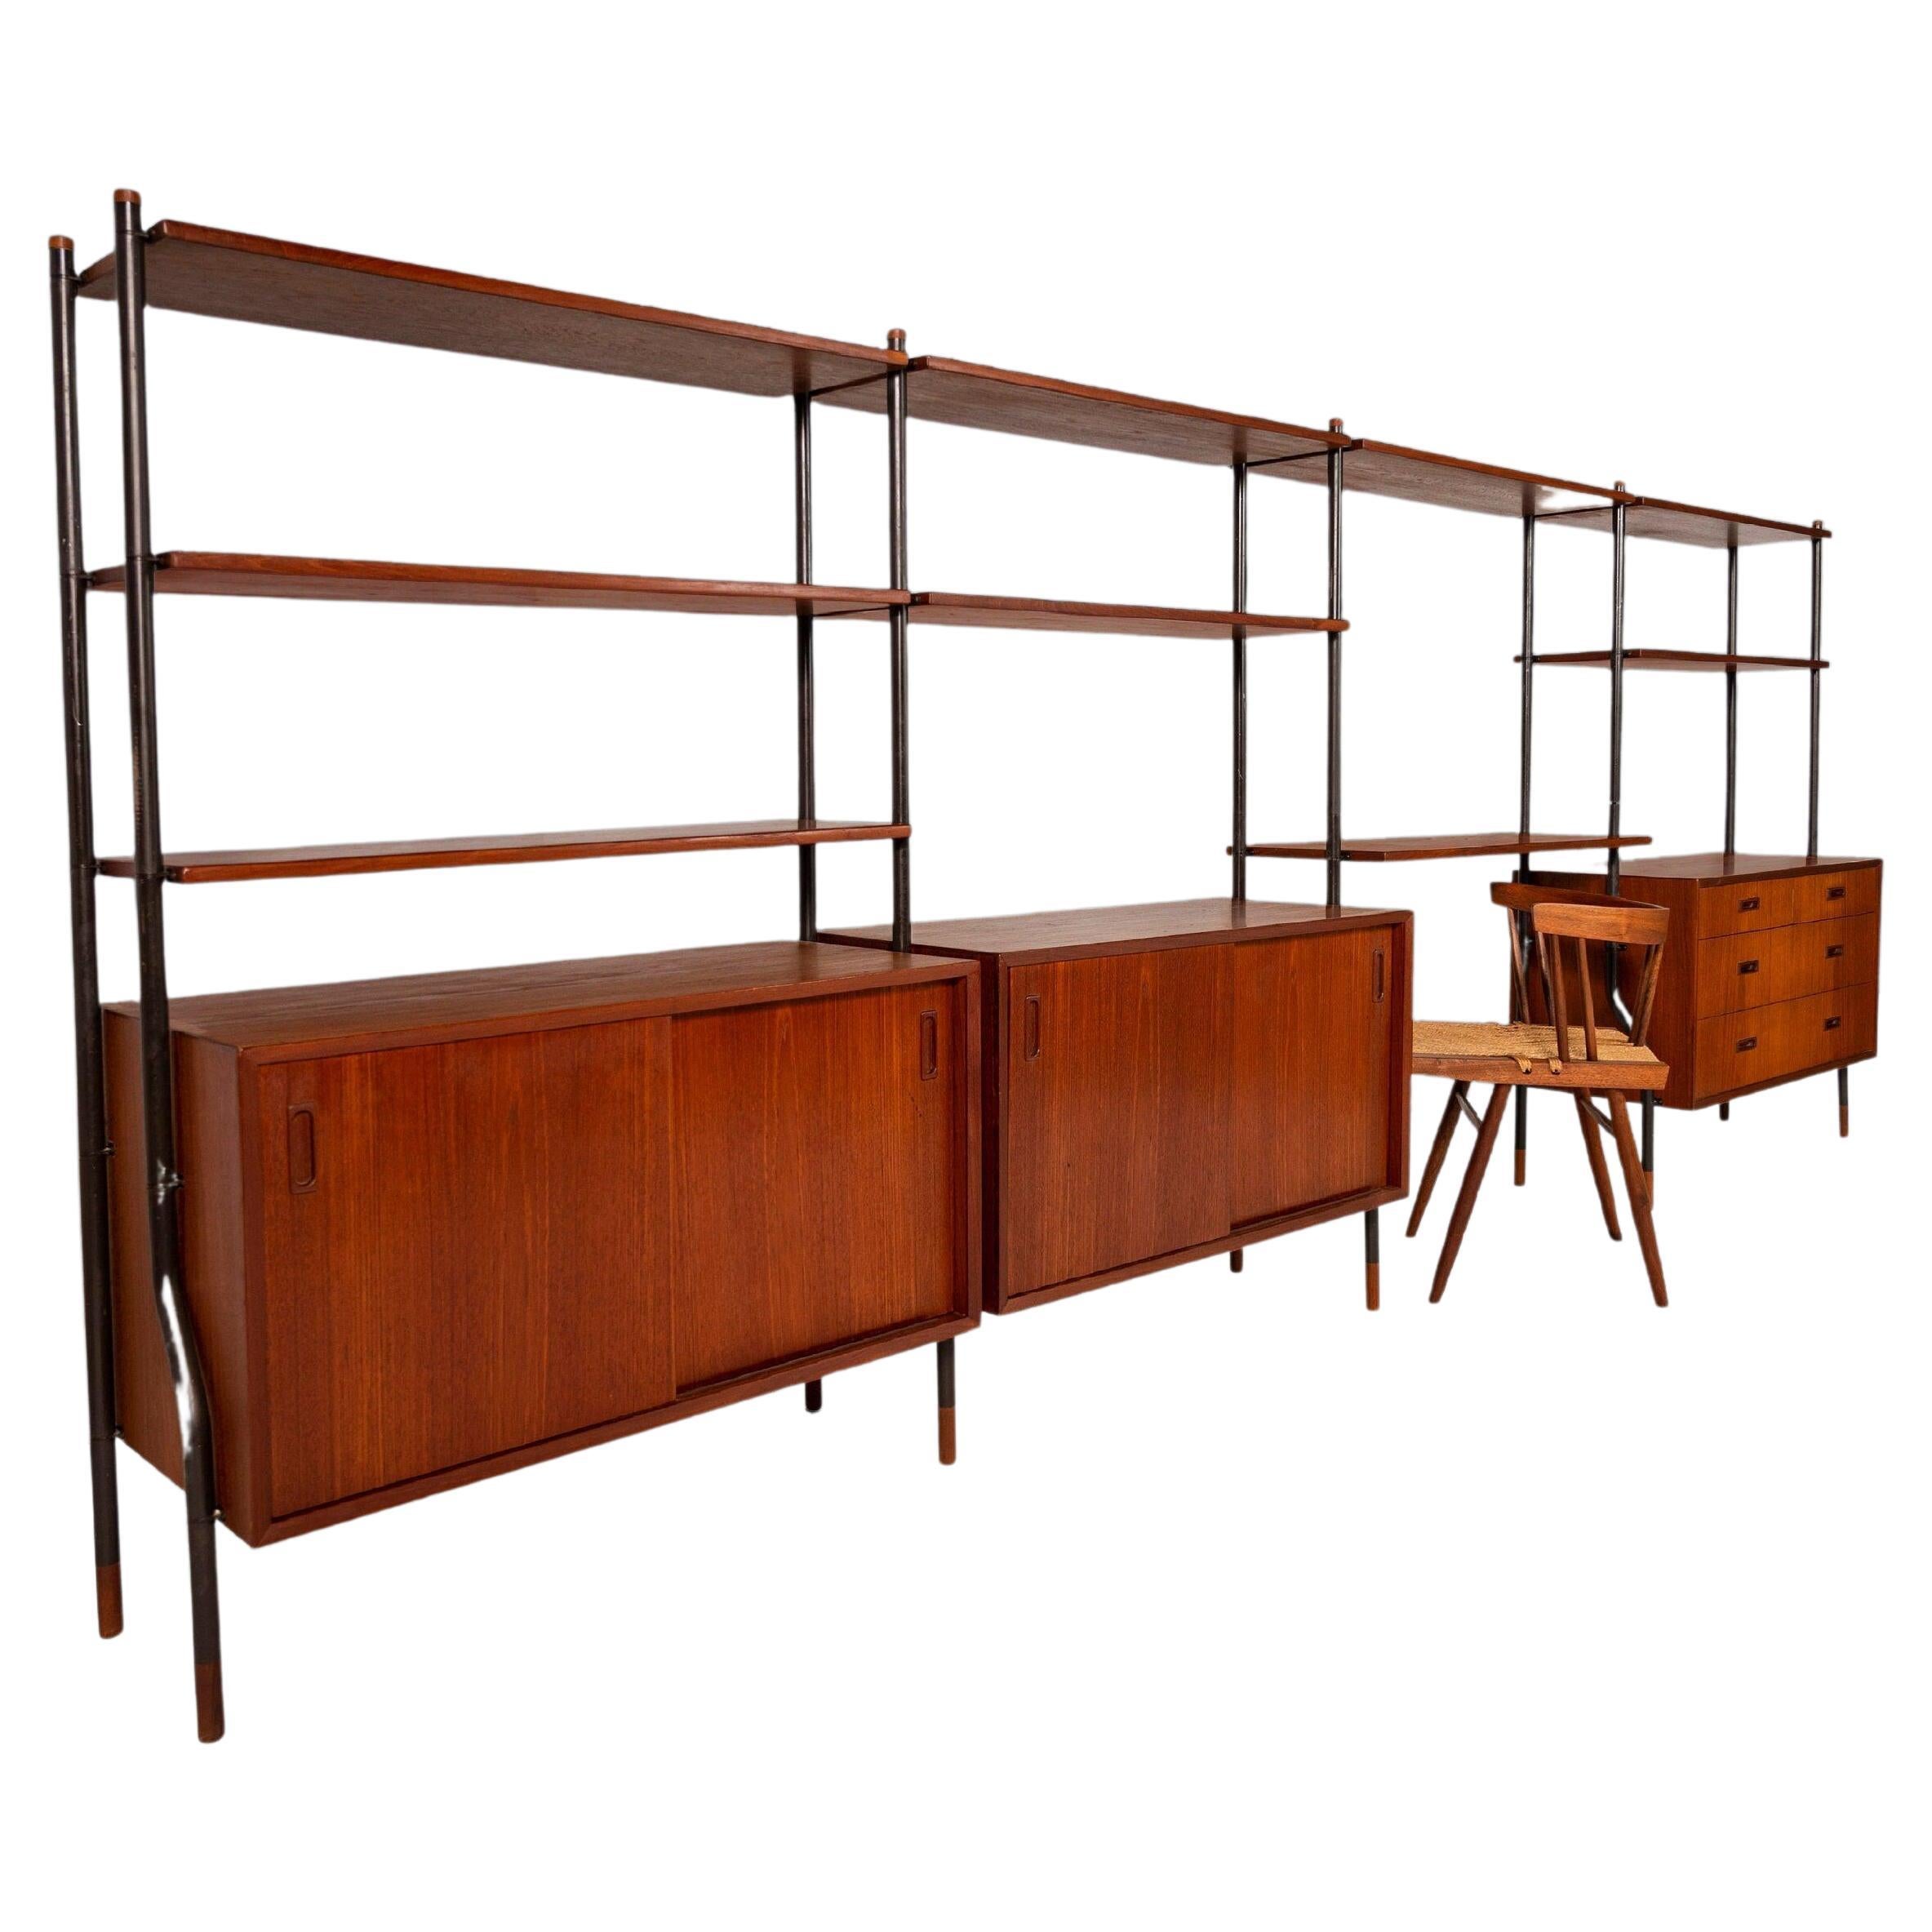 Danish Modern Modular 4 Bay Wall Unit by Lyby Mobler, c. 1960 For Sale